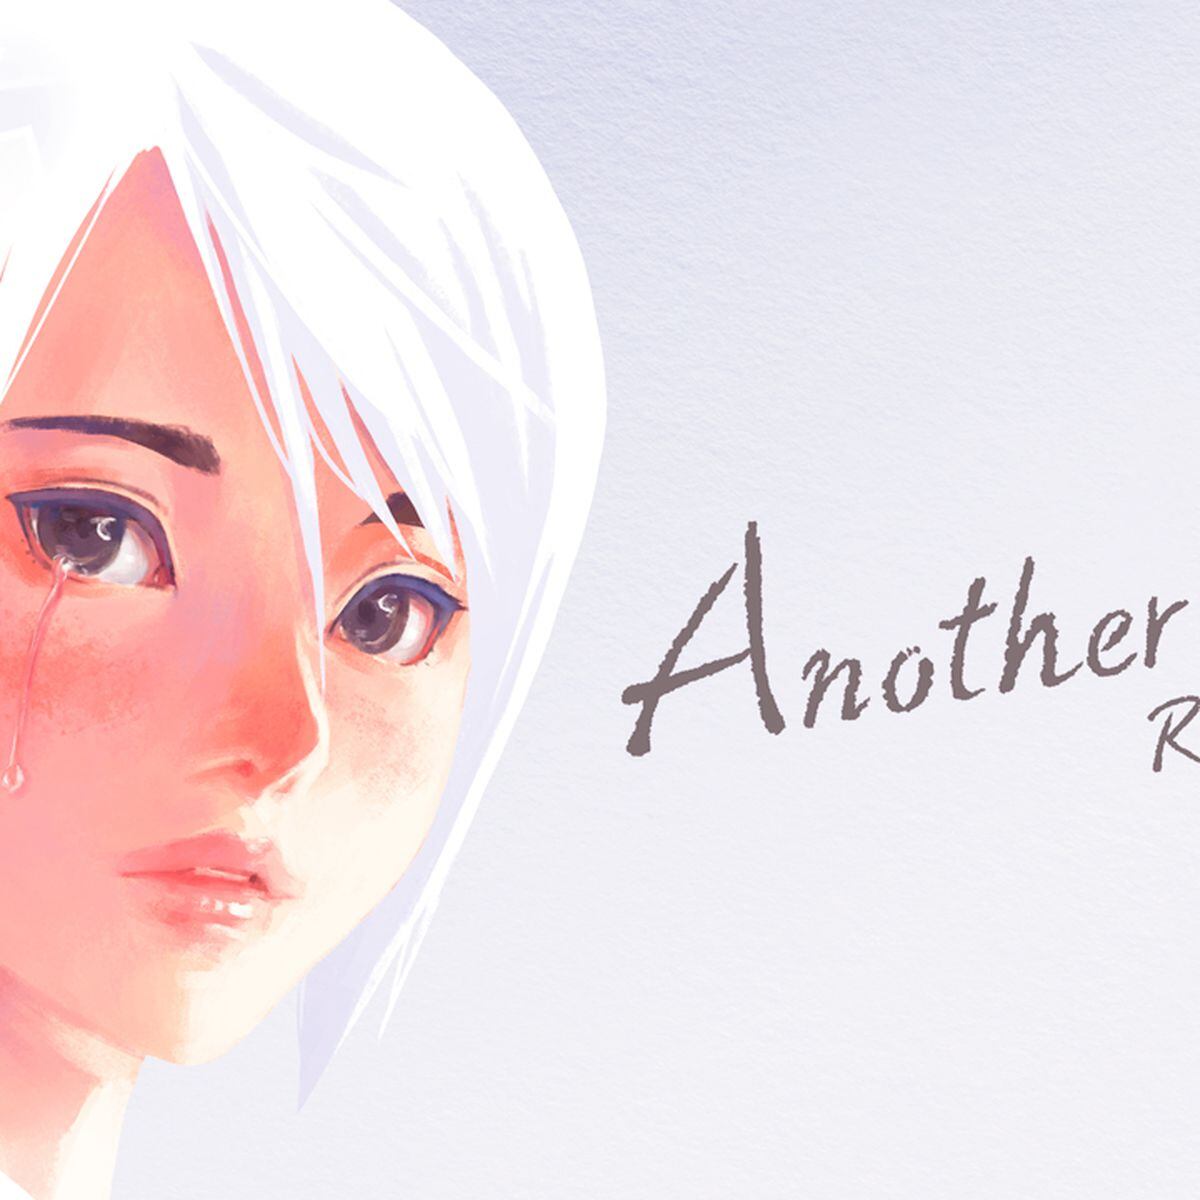 Another Code: Recollection, a revamped trip down memory lane - Meristation